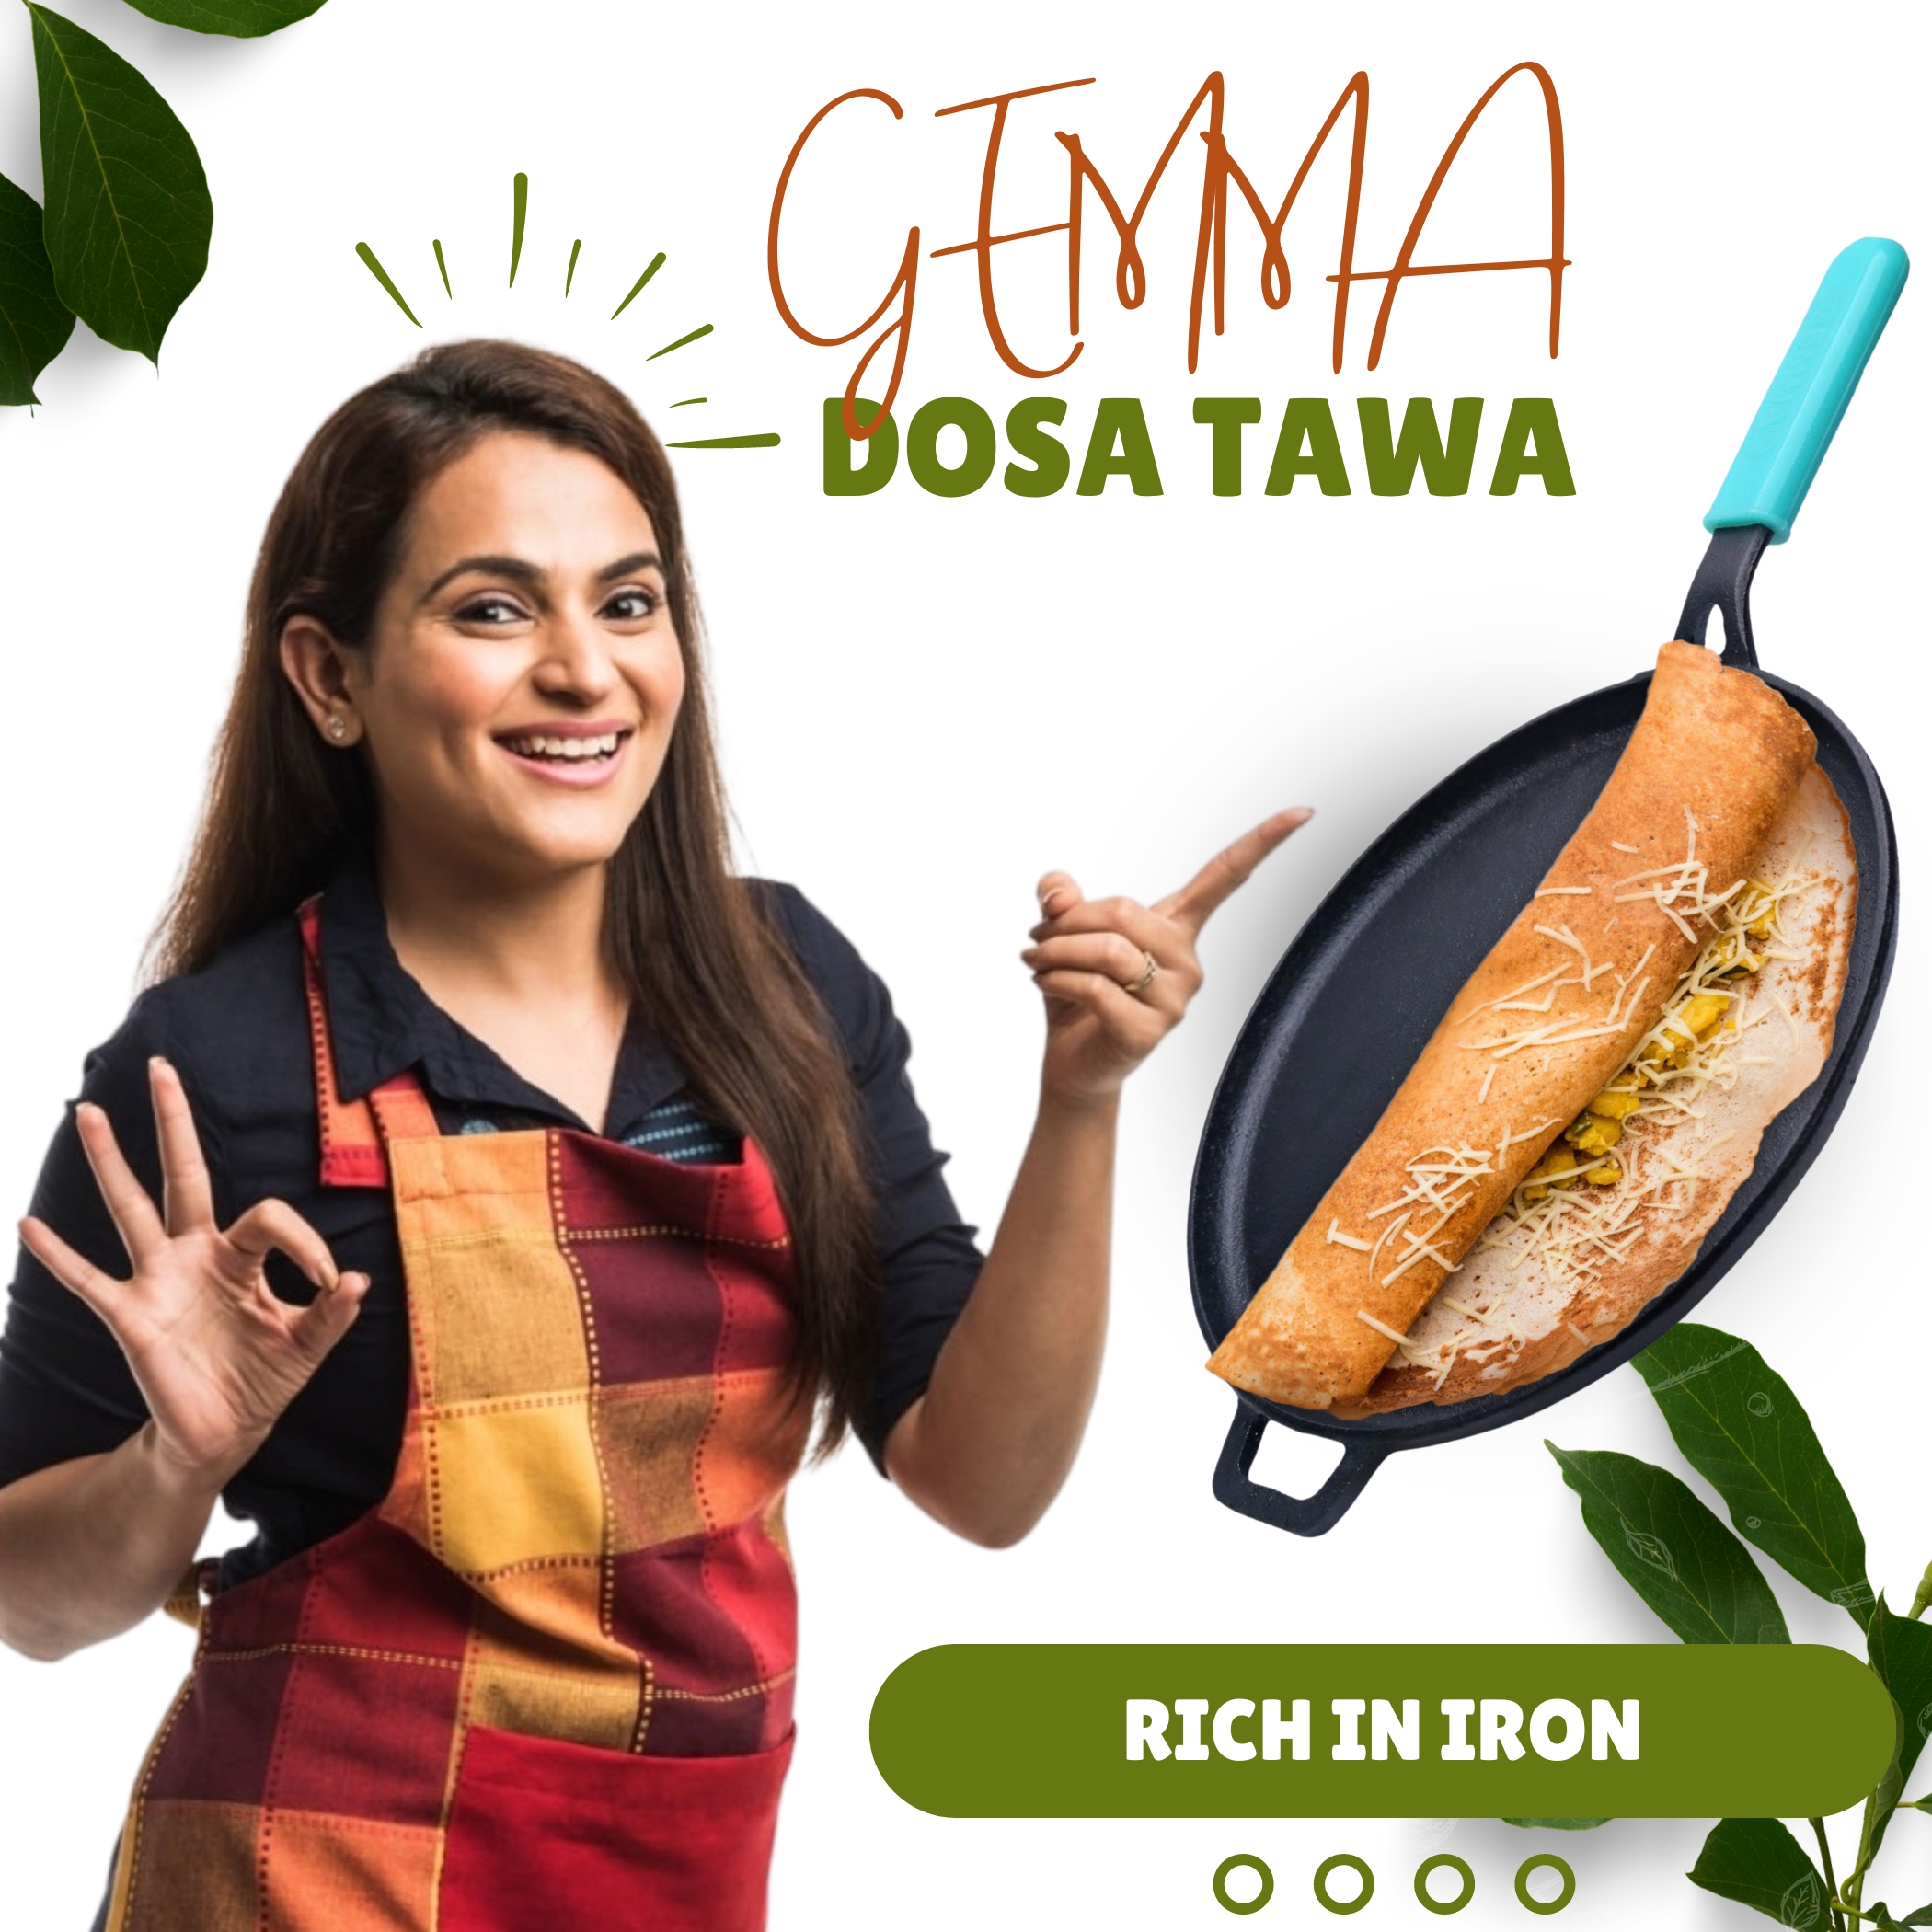 GEMMA Cast Iron Dosa Tawa with Long Handle |28cm|Pre-seasoned Pan |Non Toxic|Stick Free |Weight-(2.2 kg) |Induction Base Compatible, Silicone Grip|